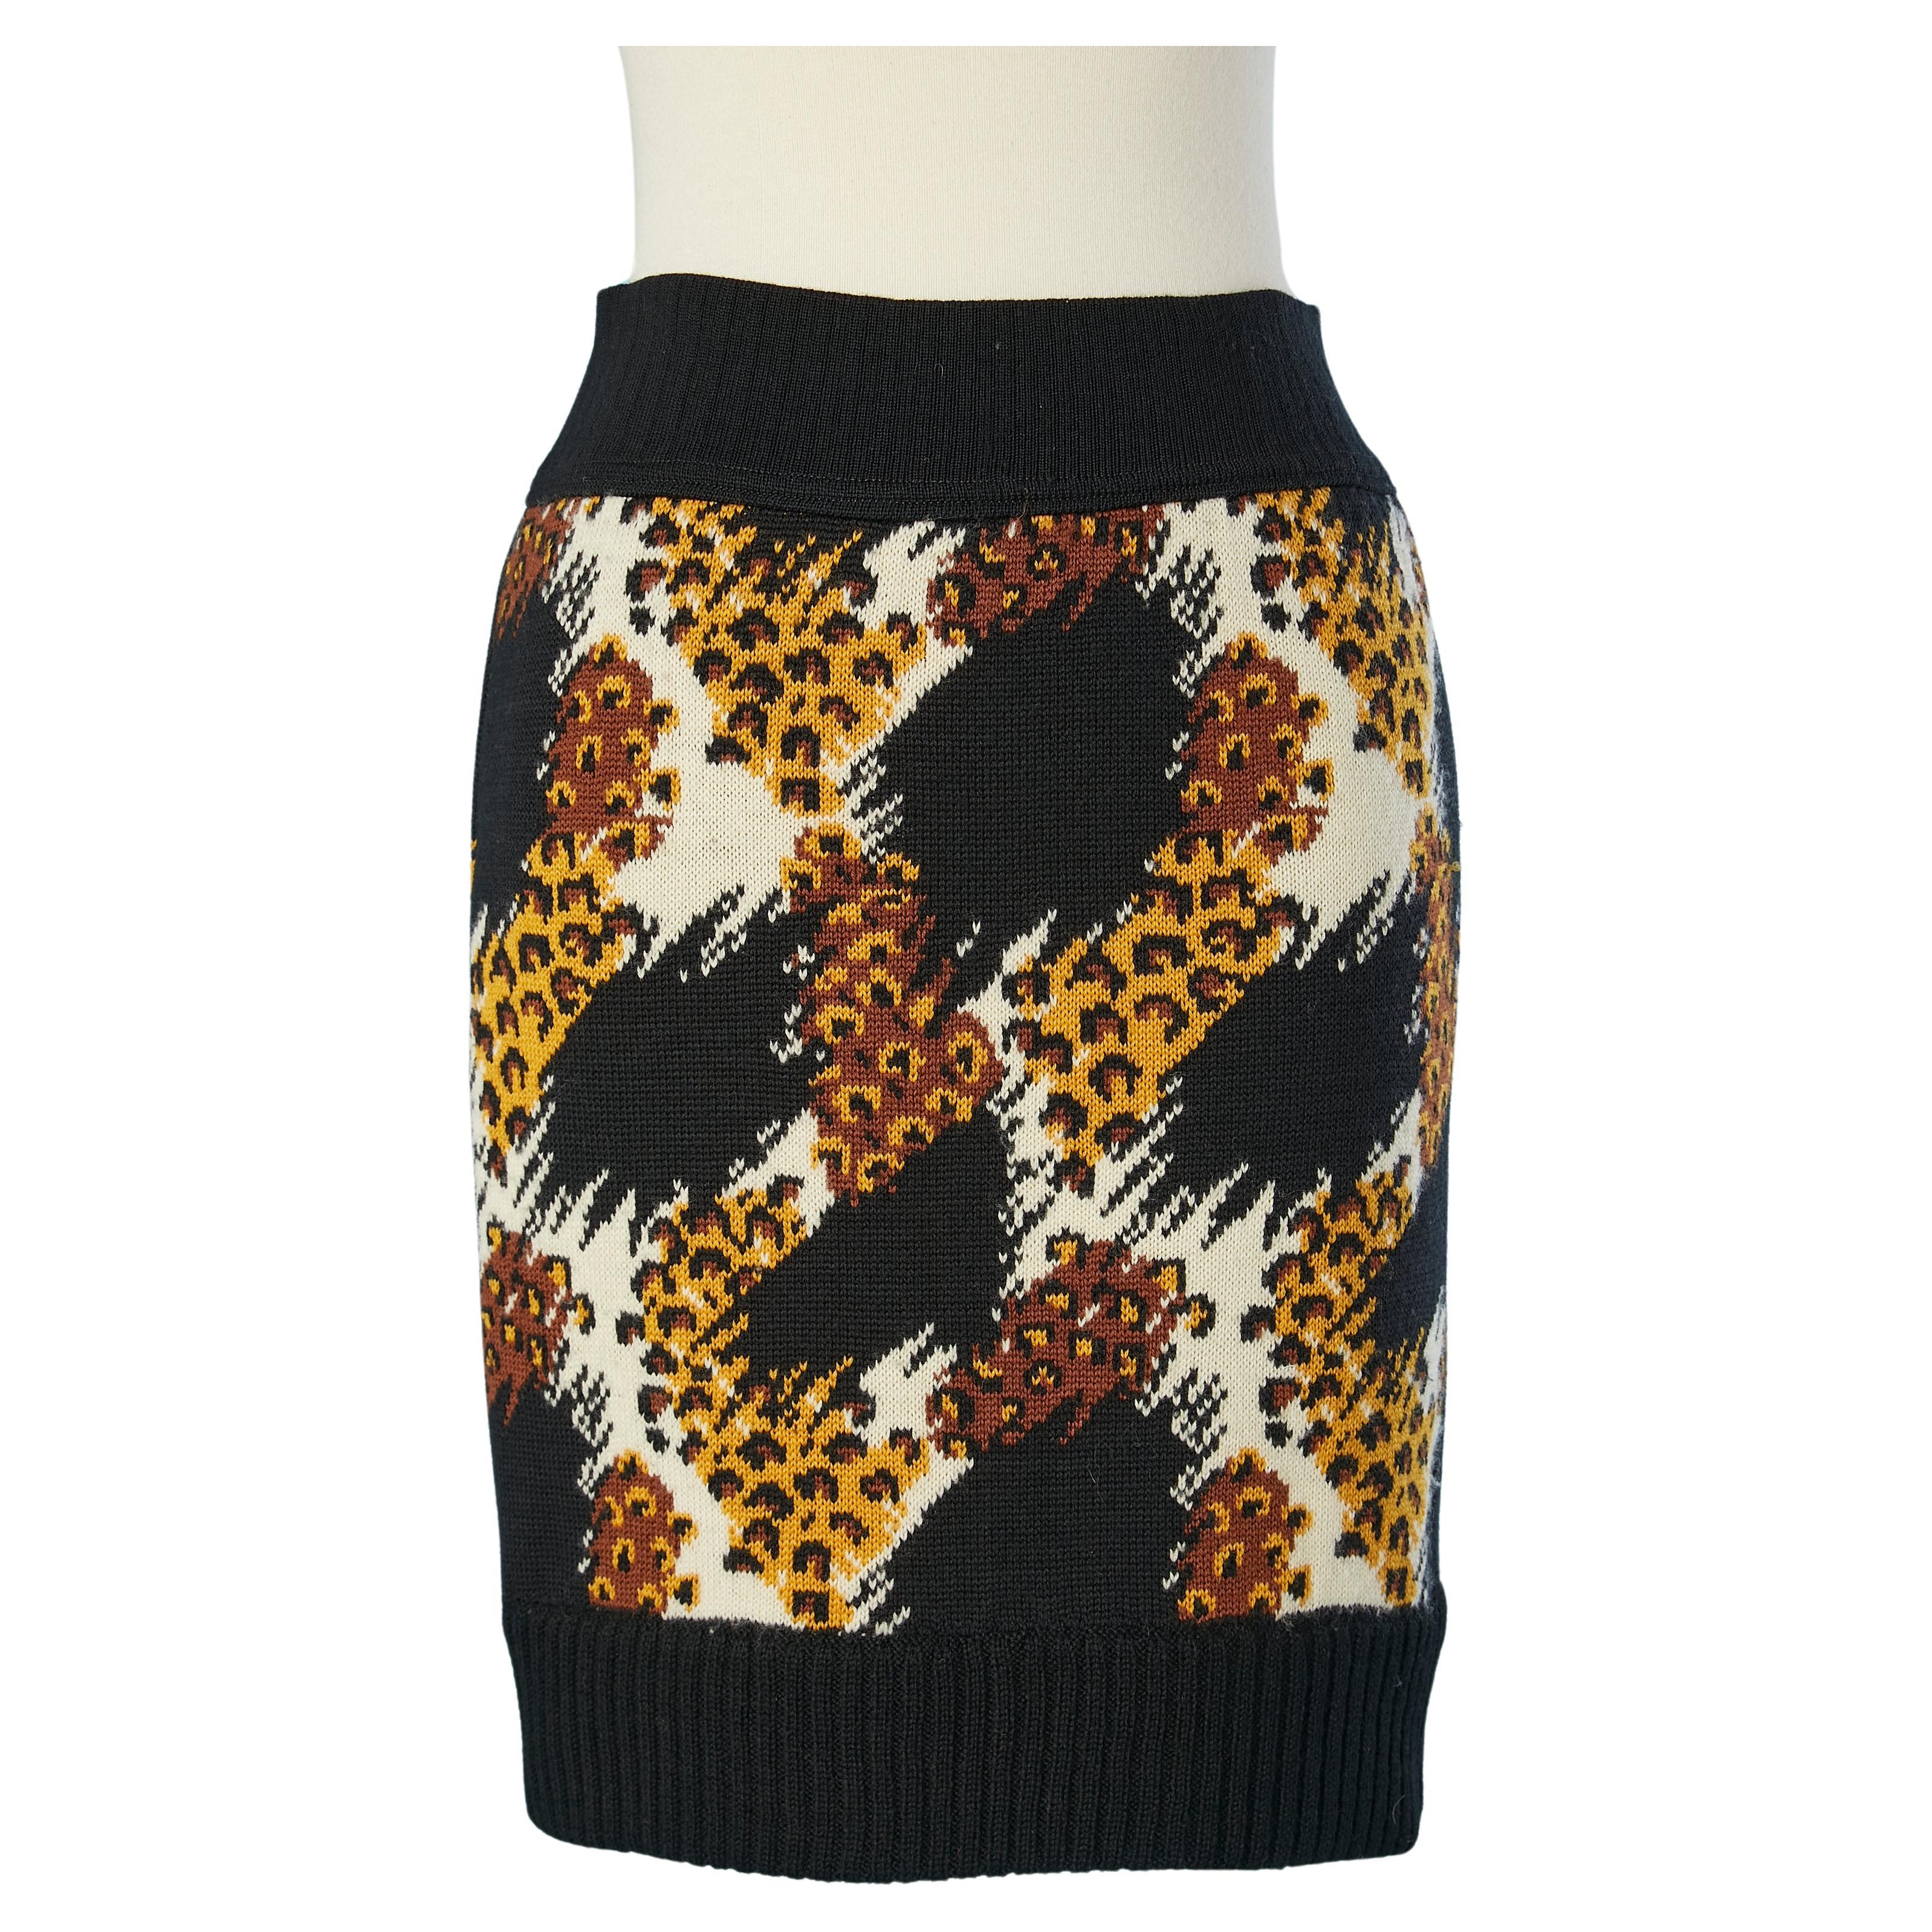 Knit wool jacquard skirt with animal pattern Yves Saint Laurent Rive Gauche  For Sale